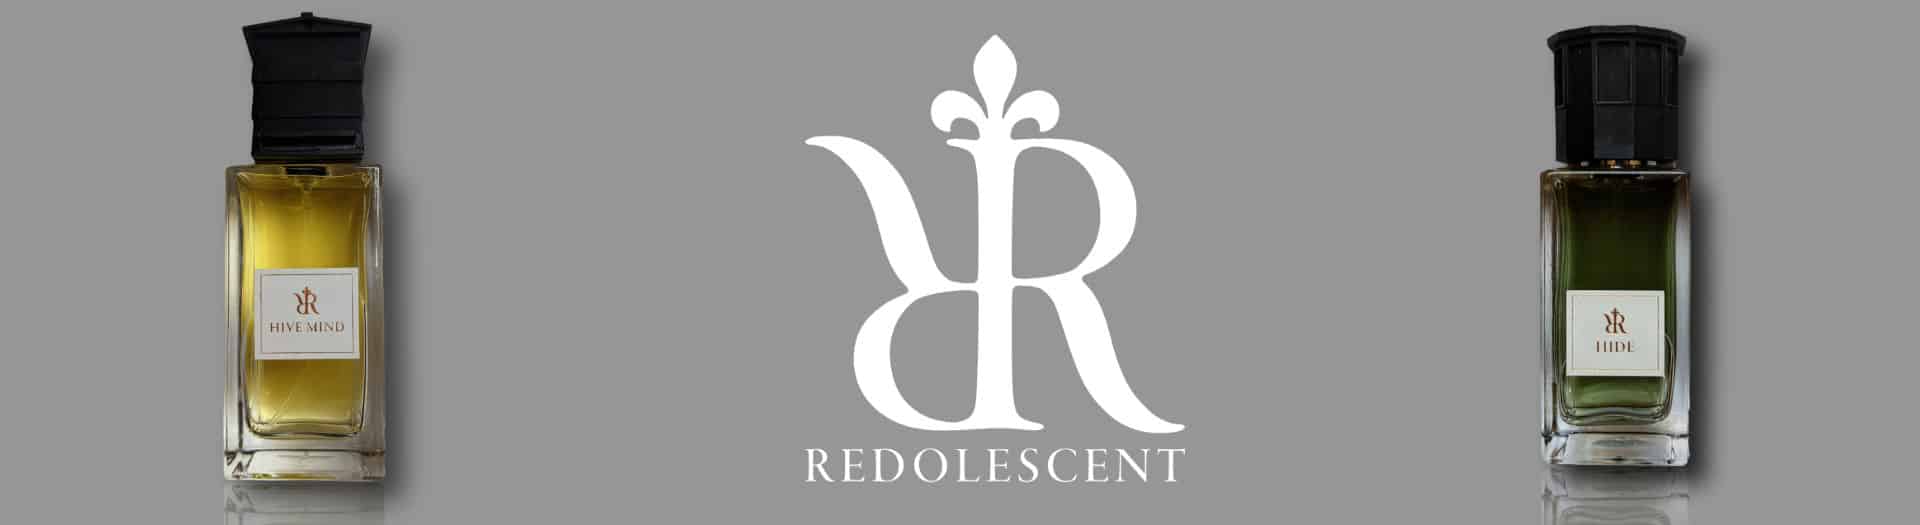 Redolescent perfunery brand header on perfume bottles on grey background with white logo